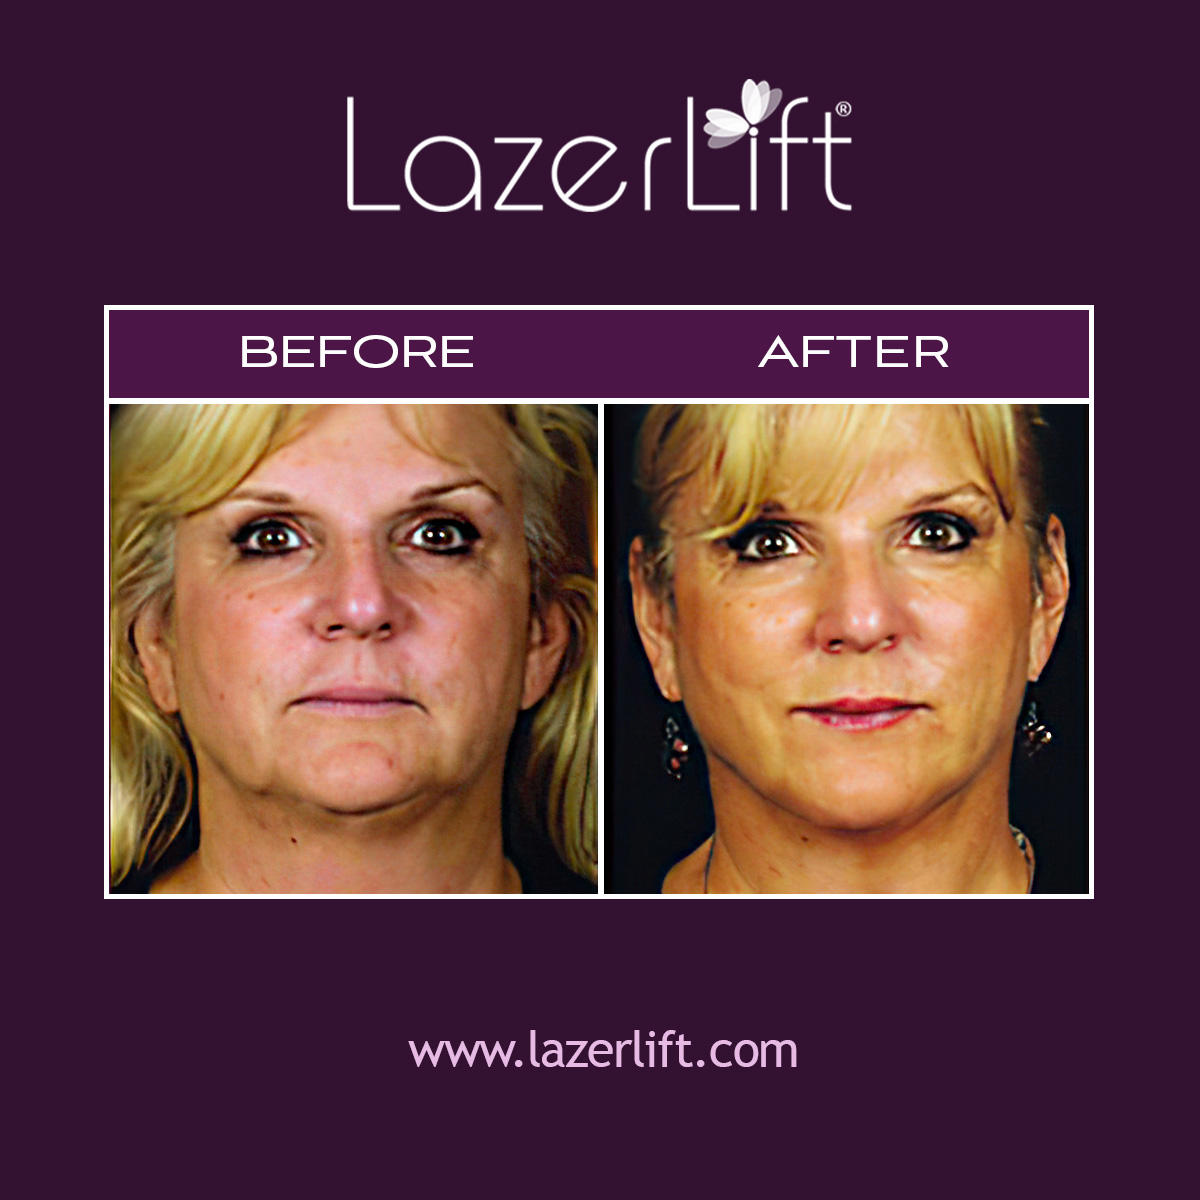 A neck lift in Tampa works to lift and tighten skin that has lost its elasticity due to the effects of gravity. LazerLift® is a non-invasive solution to treat lax neck skin and neck bands. Before LazerLift®, neck lift surgery was required to reverse the effects of aging. Now, patients can enjoy a youthful neck without the lengthy procedure or healing process.